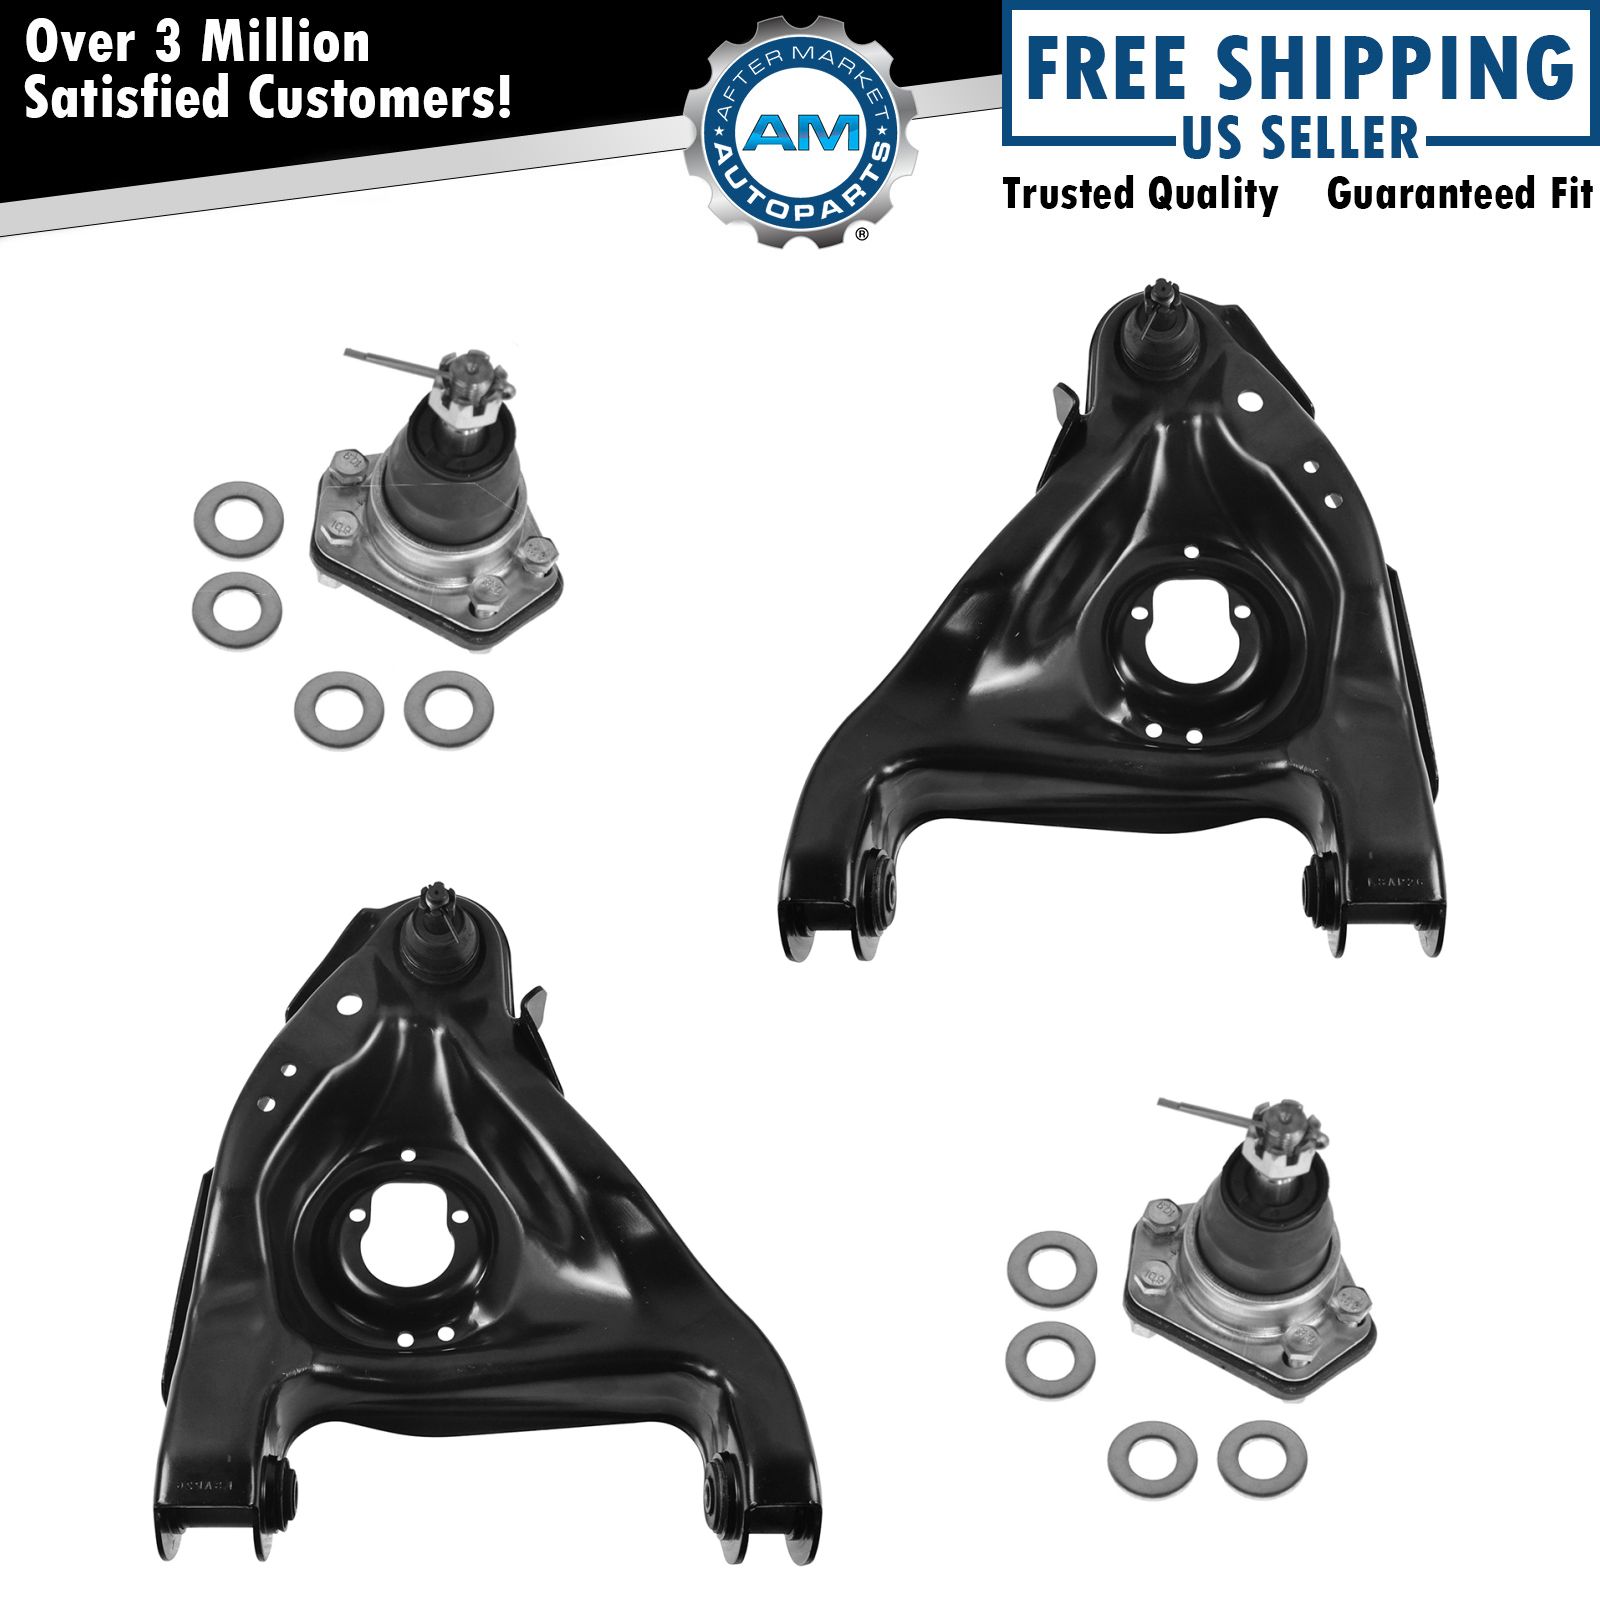 Front Lower Control Arm & Upper Ball Joints LH RH Set of 4 for S10 S15 2WD Truck